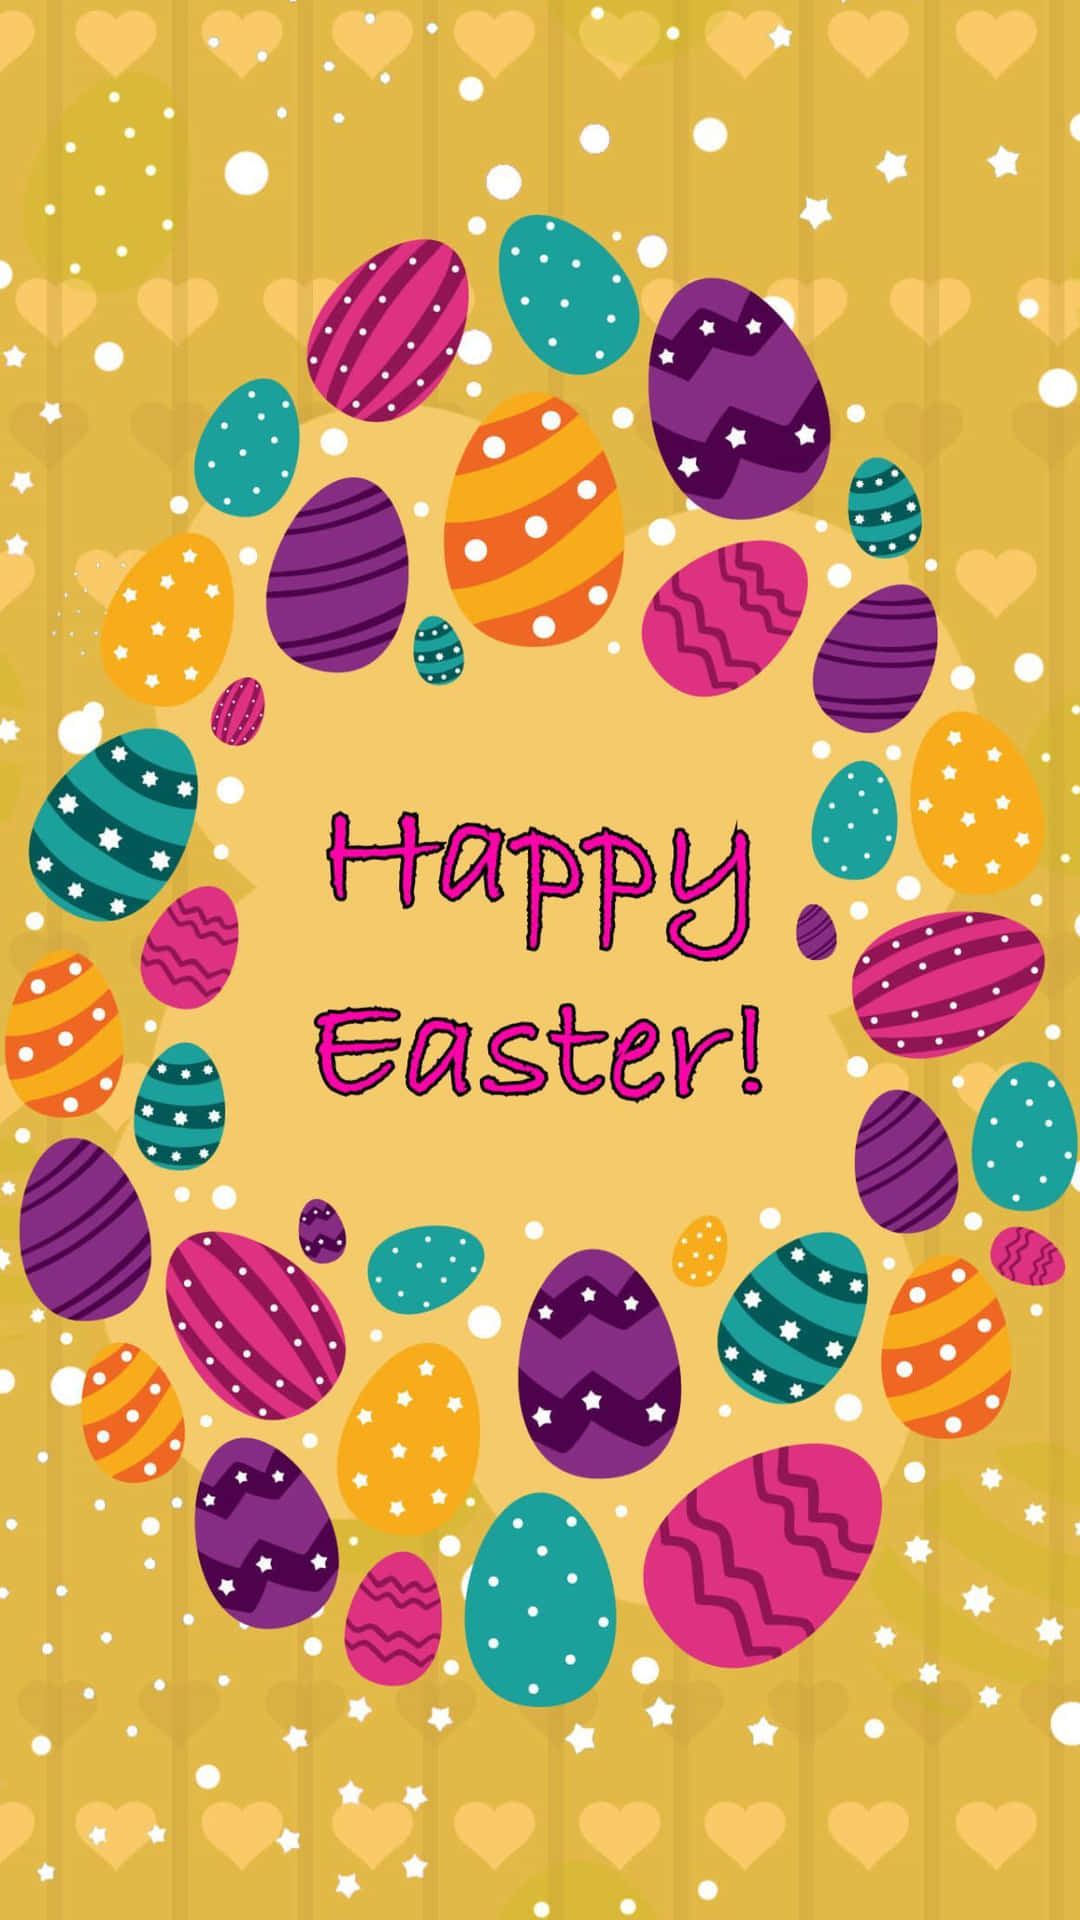 Celebrate Easter with cute and happy decorations! Wallpaper